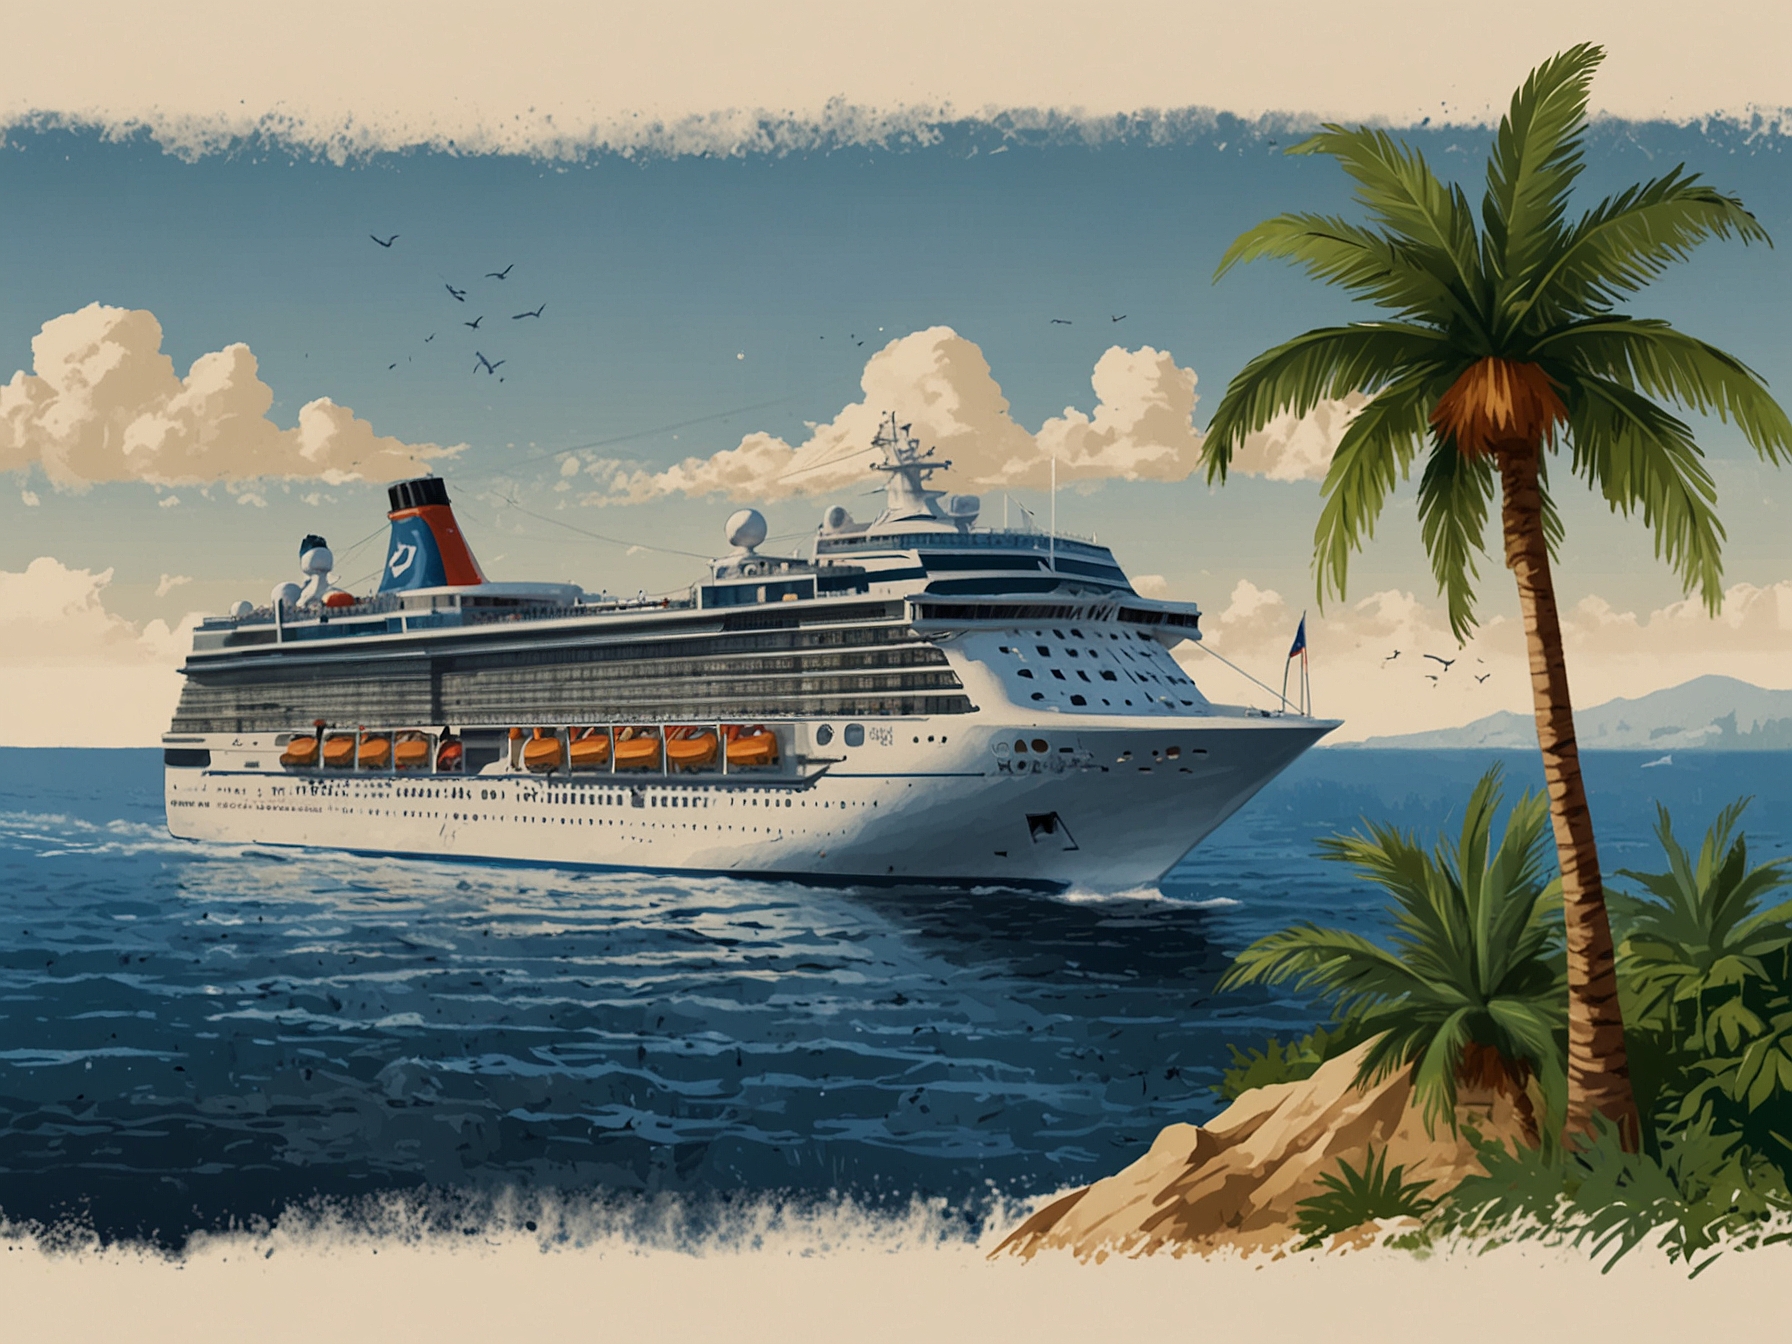 A cruise ship setting sail, symbolizing the rebound in travel demand and positive financial outlook for companies like Carnival, Royal Caribbean, and Norwegian Cruise Line.